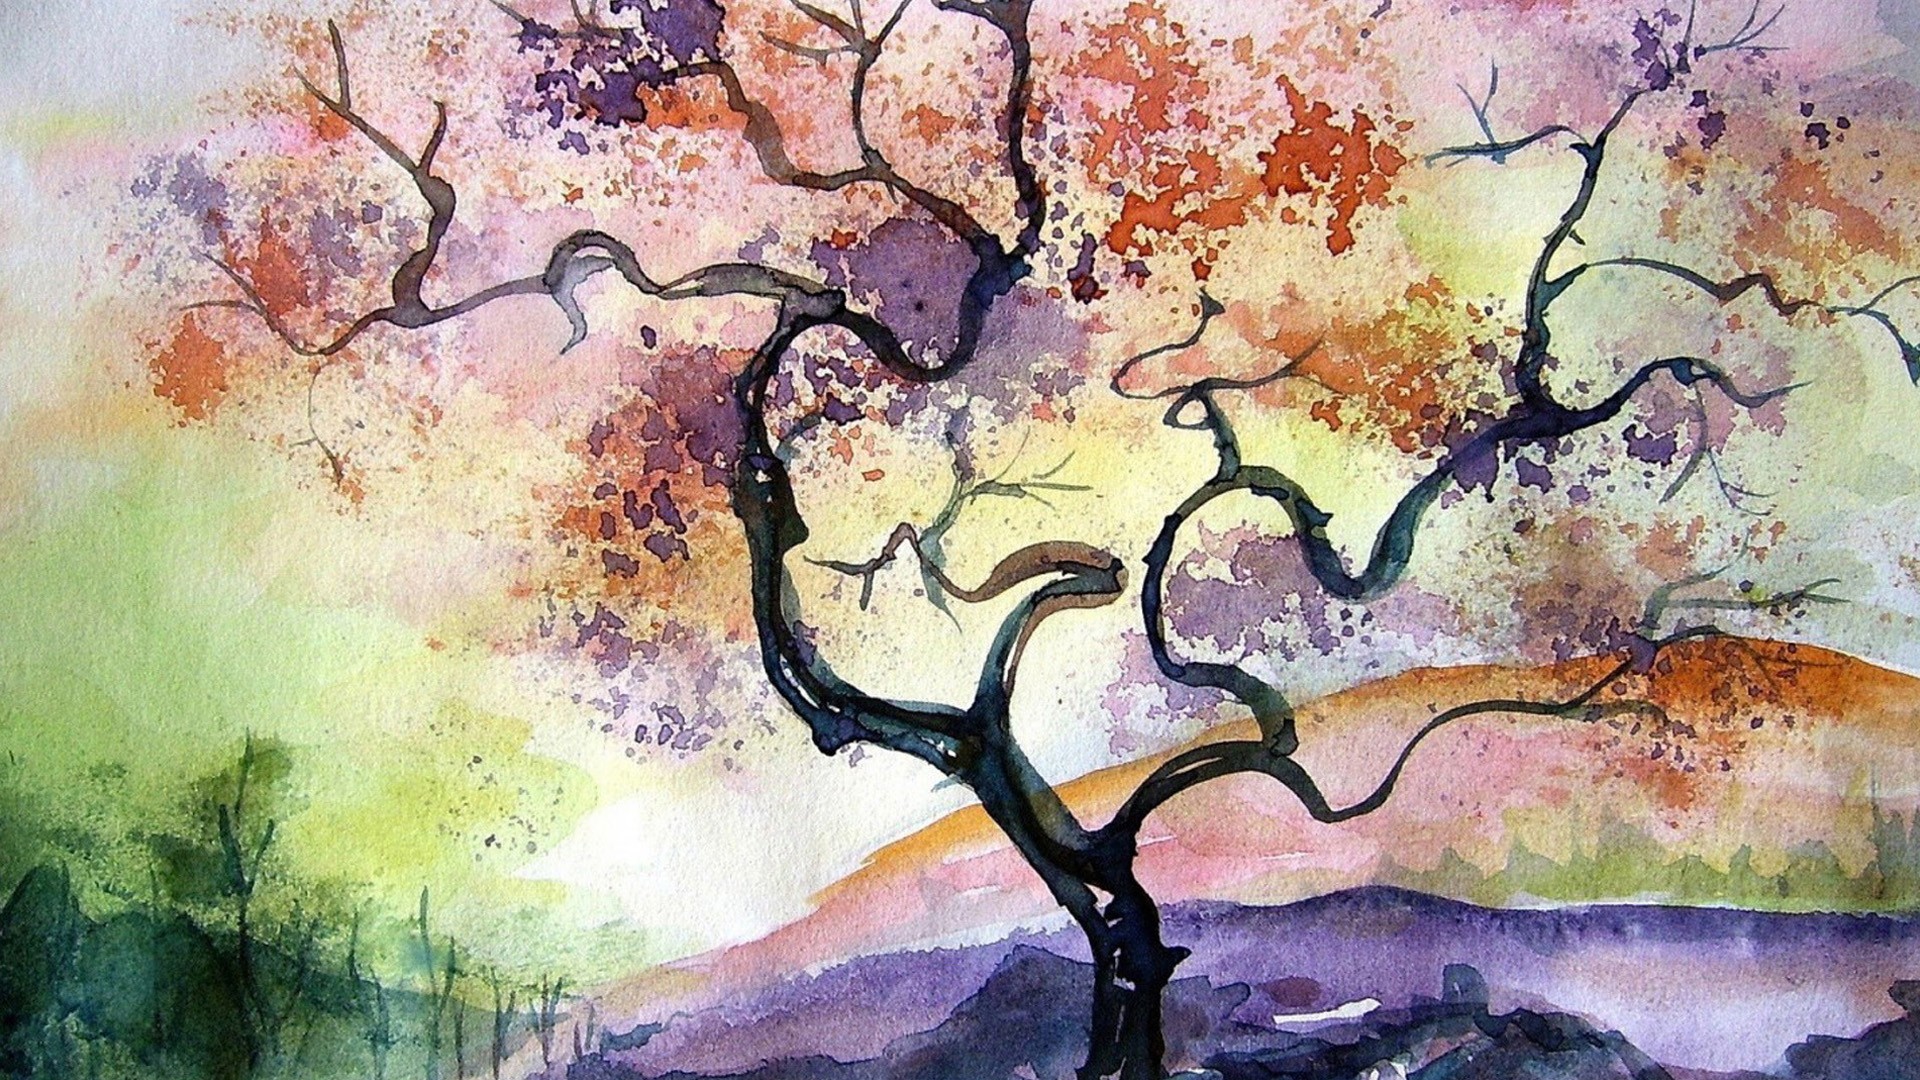 General 1920x1080 painting watercolor artwork warm colors nature landscape trees colorful hills cherry blossom